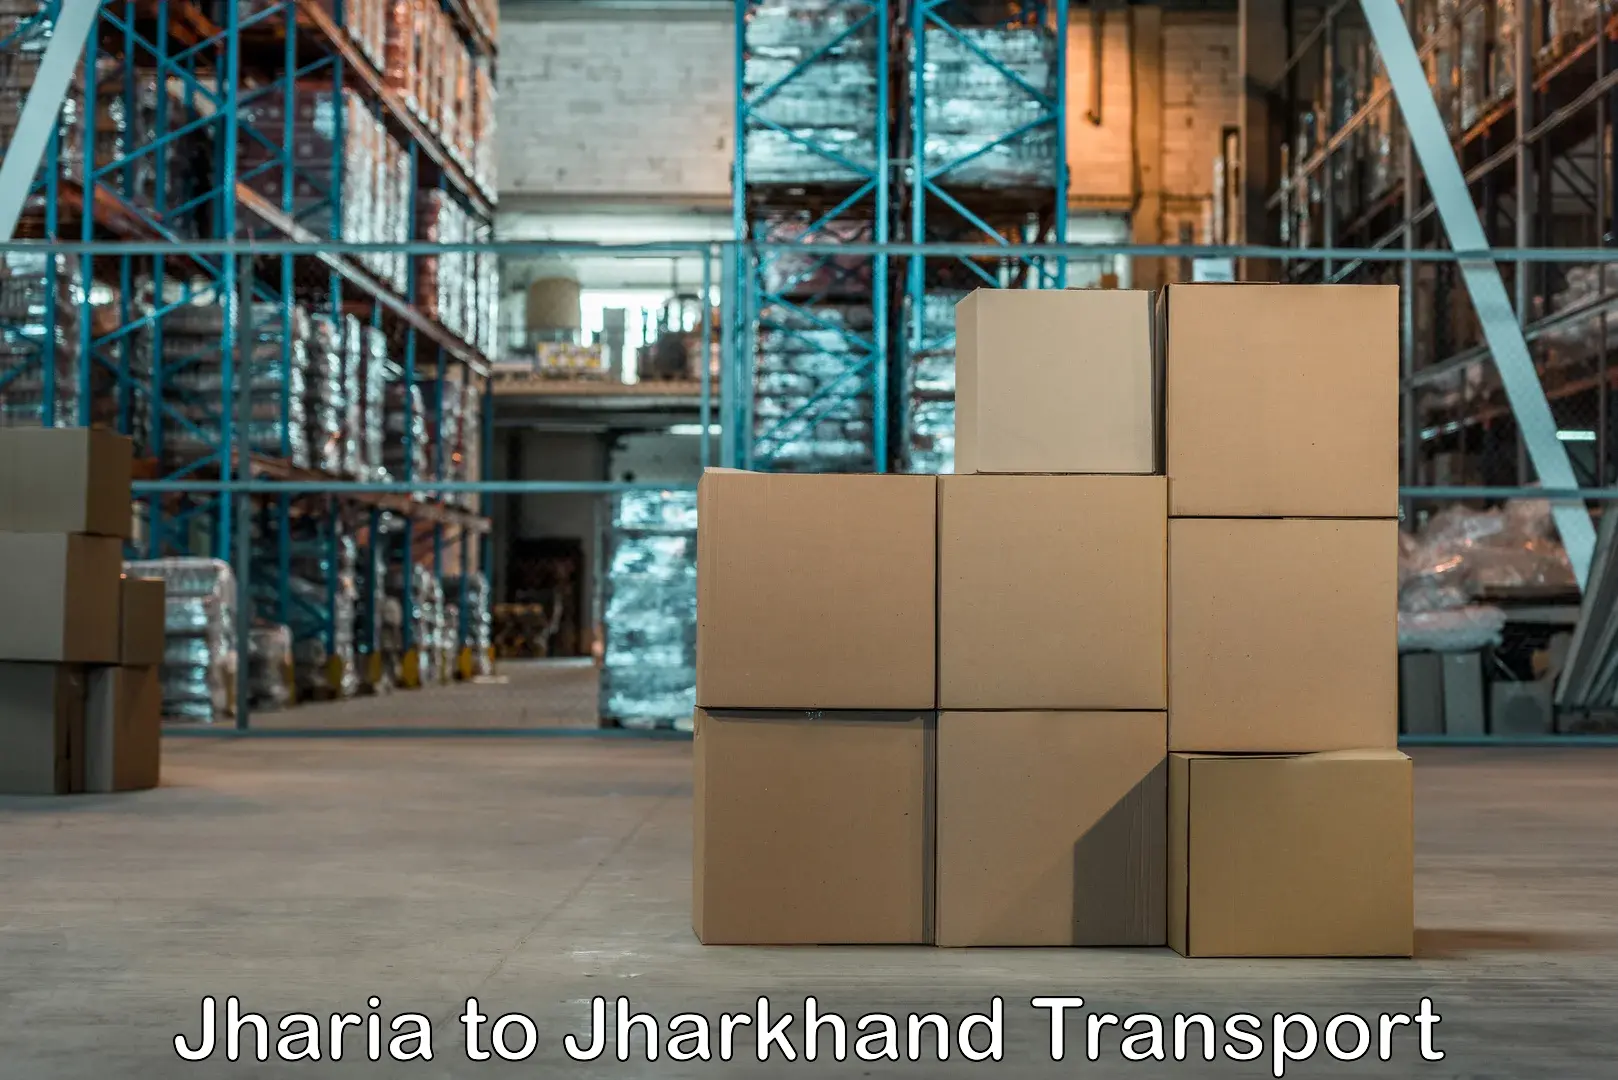 Lorry transport service Jharia to Jharkhand